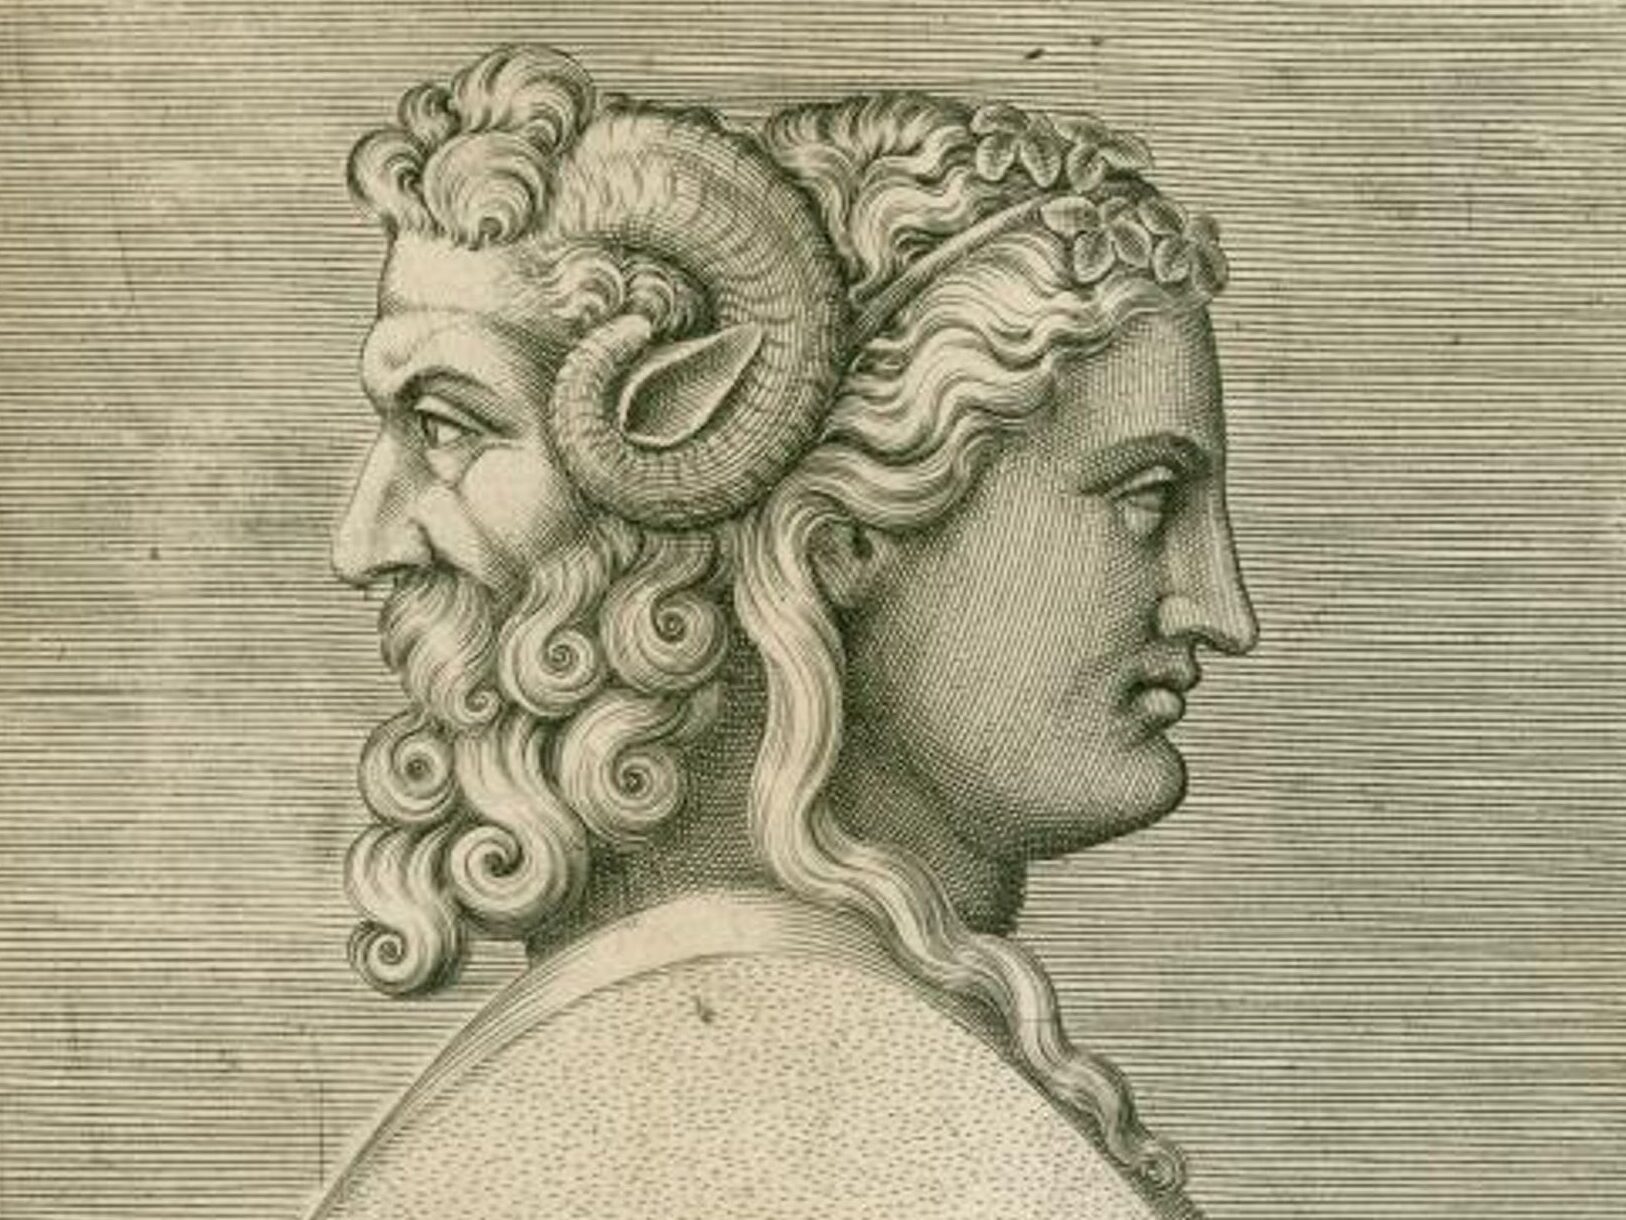 Picture of the Roman double-faced god Janus: one face, older in age, looks back to the past, while the other, younger, looks forward to the future.